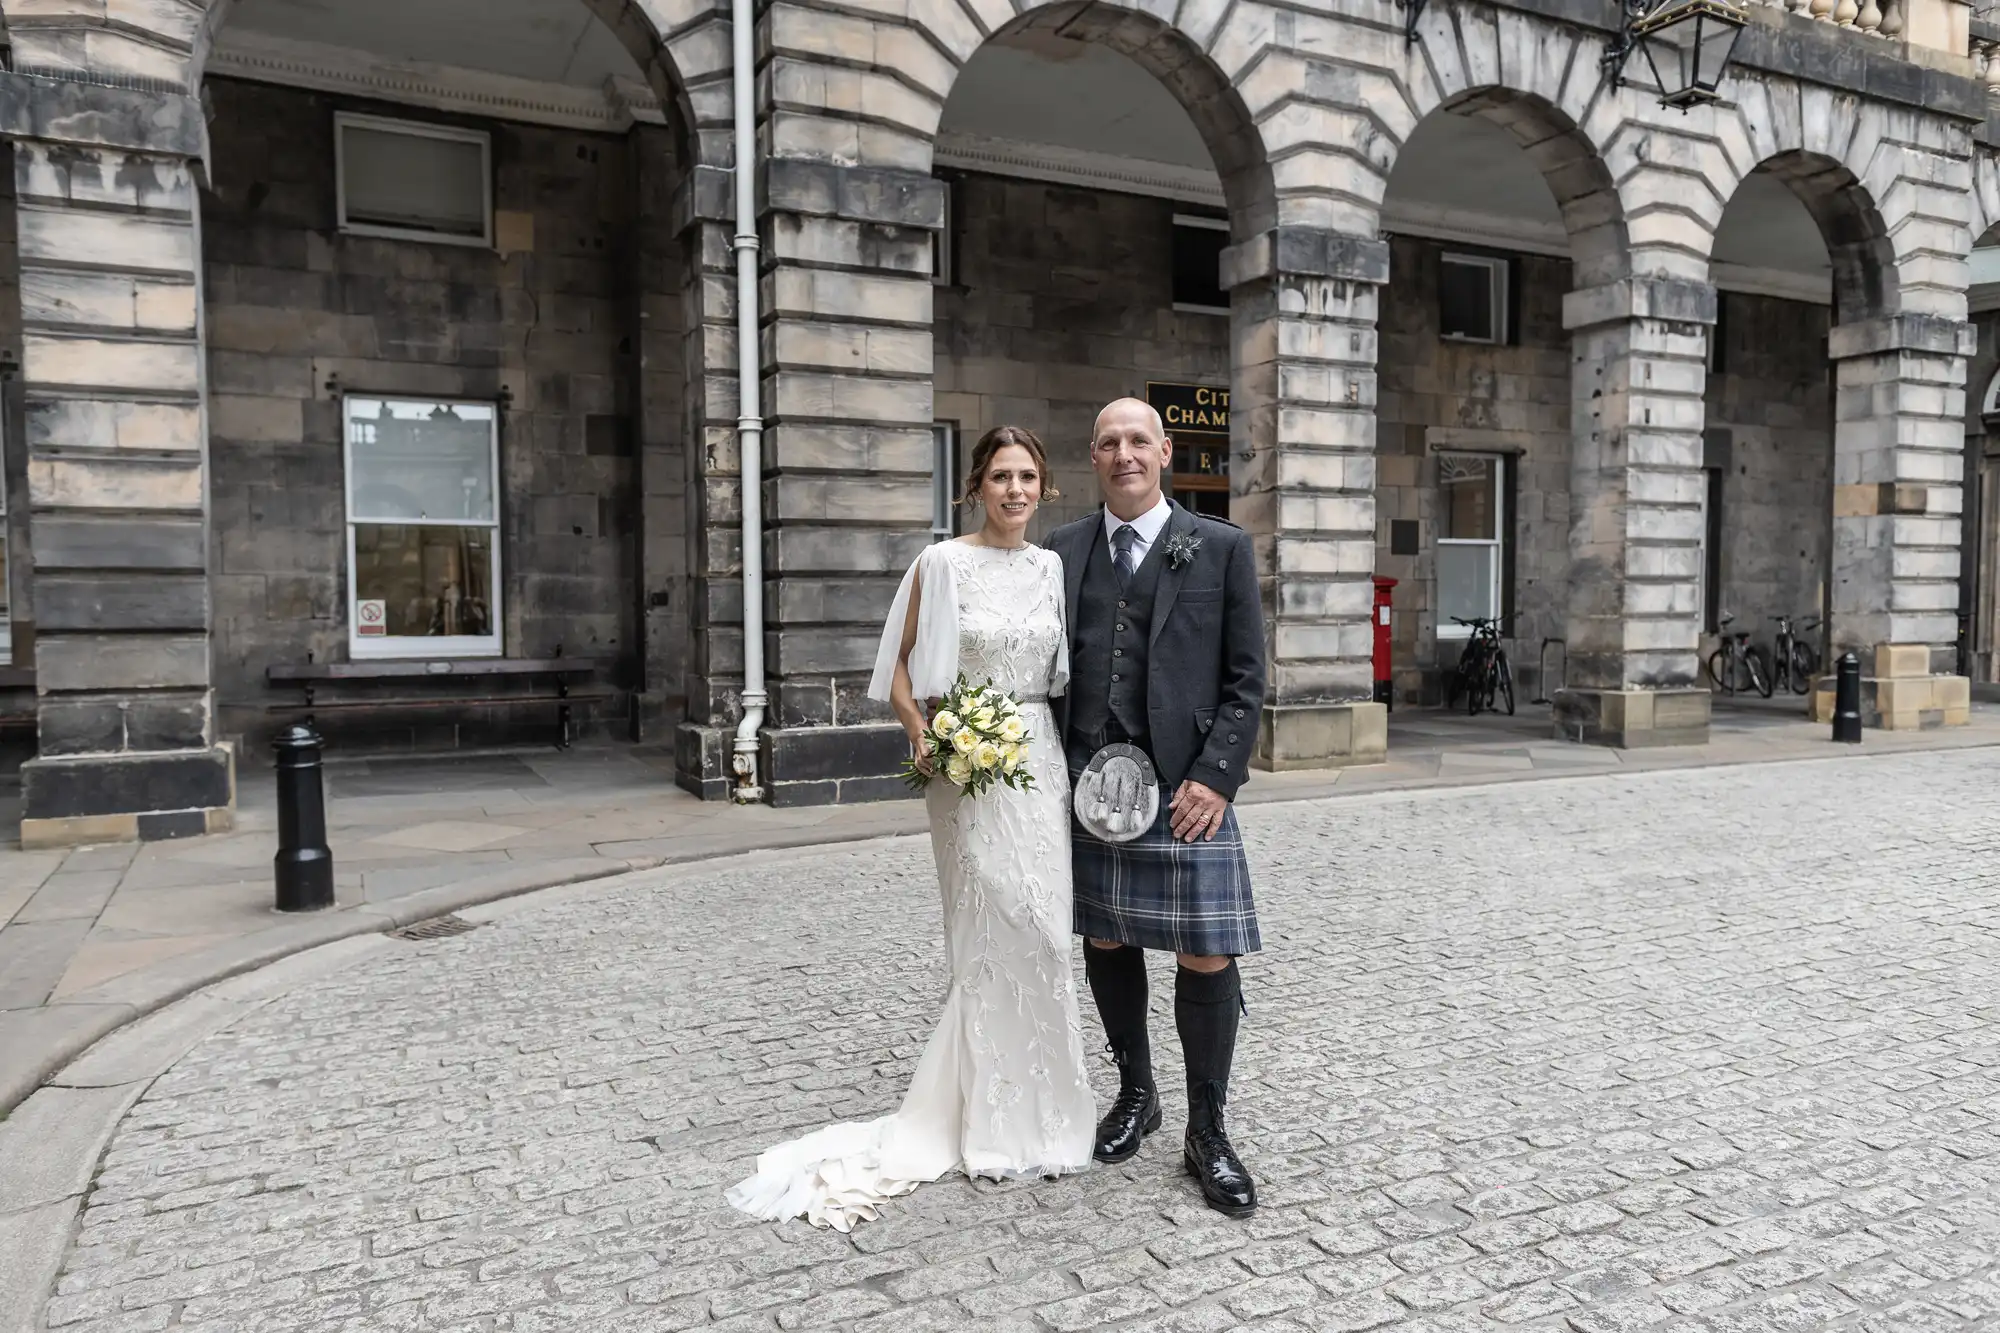 A bride in a white dress and a groom in a kilt stand side by side on a cobblestone street in front of a historic stone building with arches.